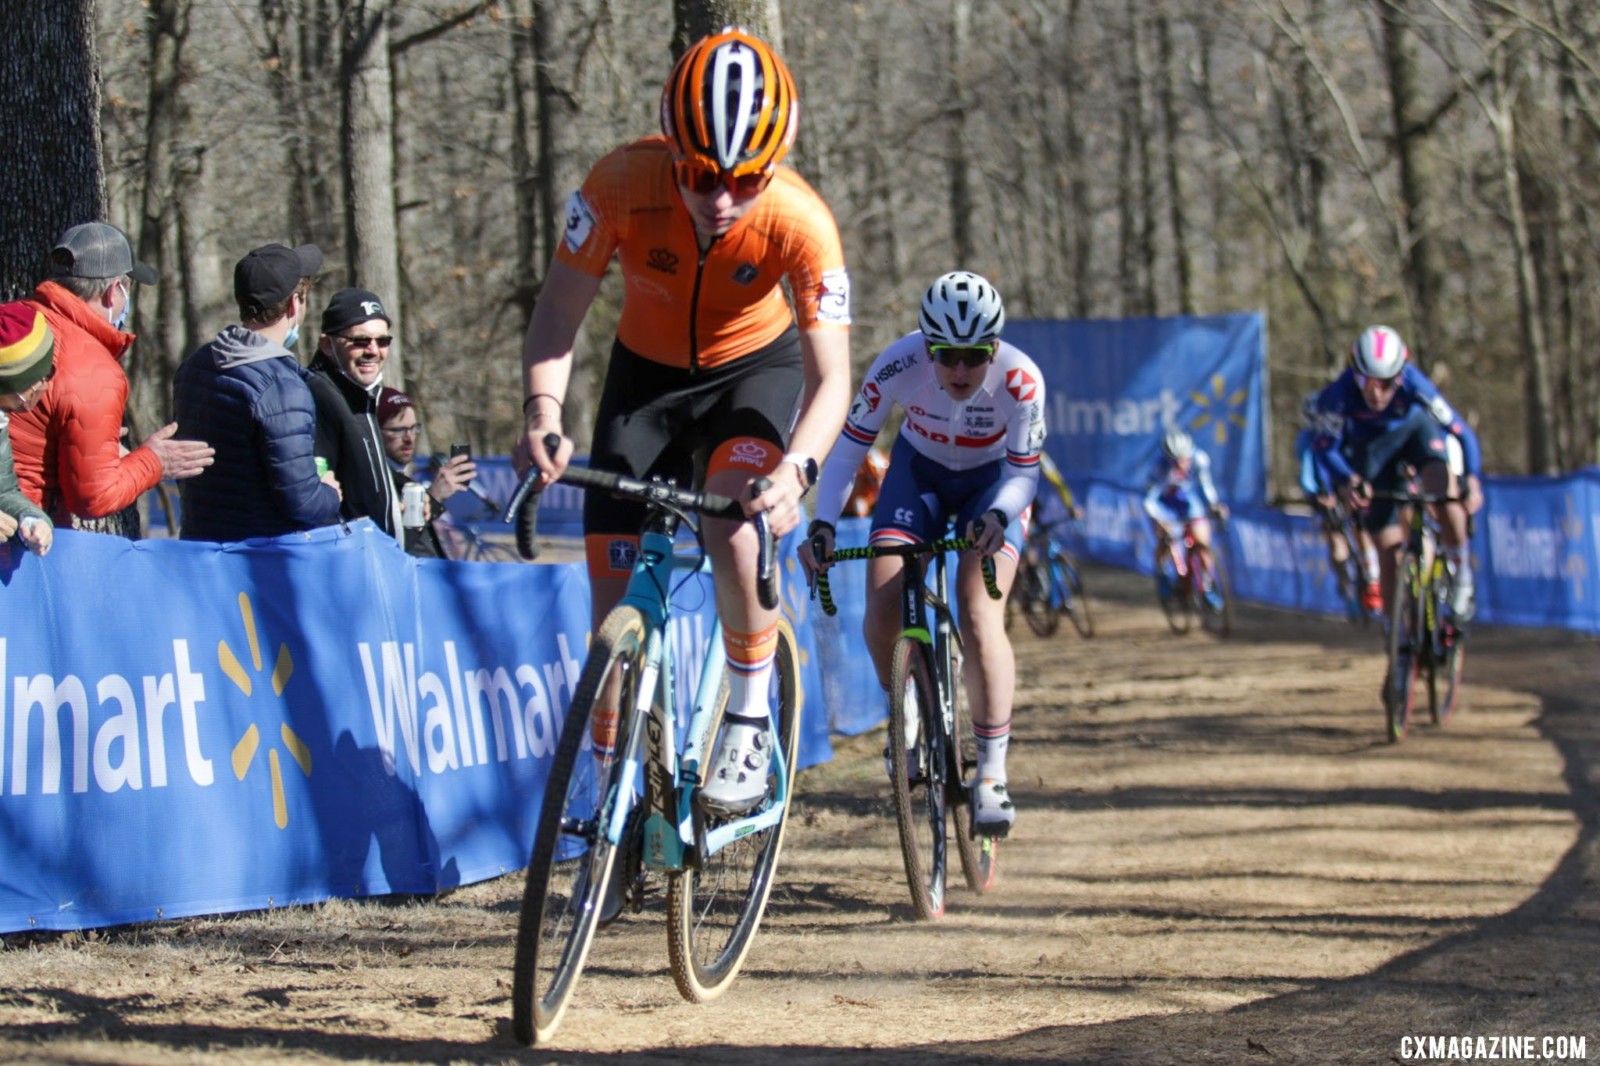 First-year junior Lauren Molengraaf grabbed the holeshot and held on for bronze. Junior Women. 2022 Cyclocross World Championships, Fayetteville, Arkansas USA. © D. Mable / Cyclocross Magazine